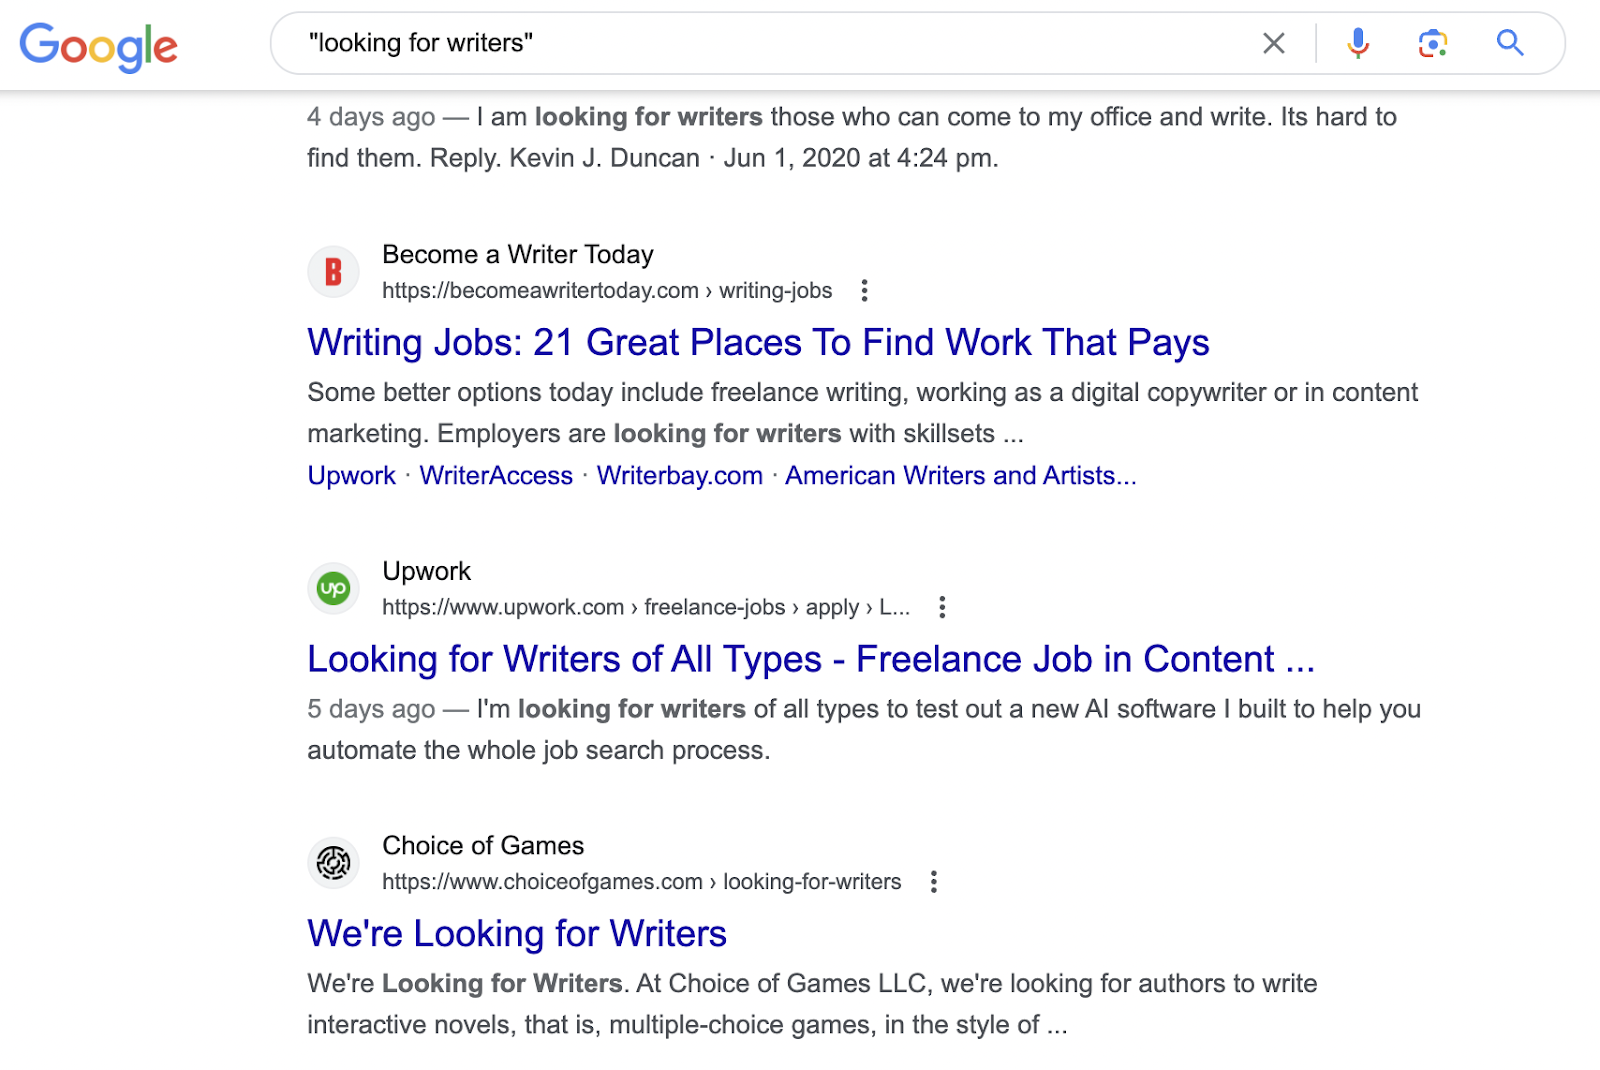 How to find writers on Google